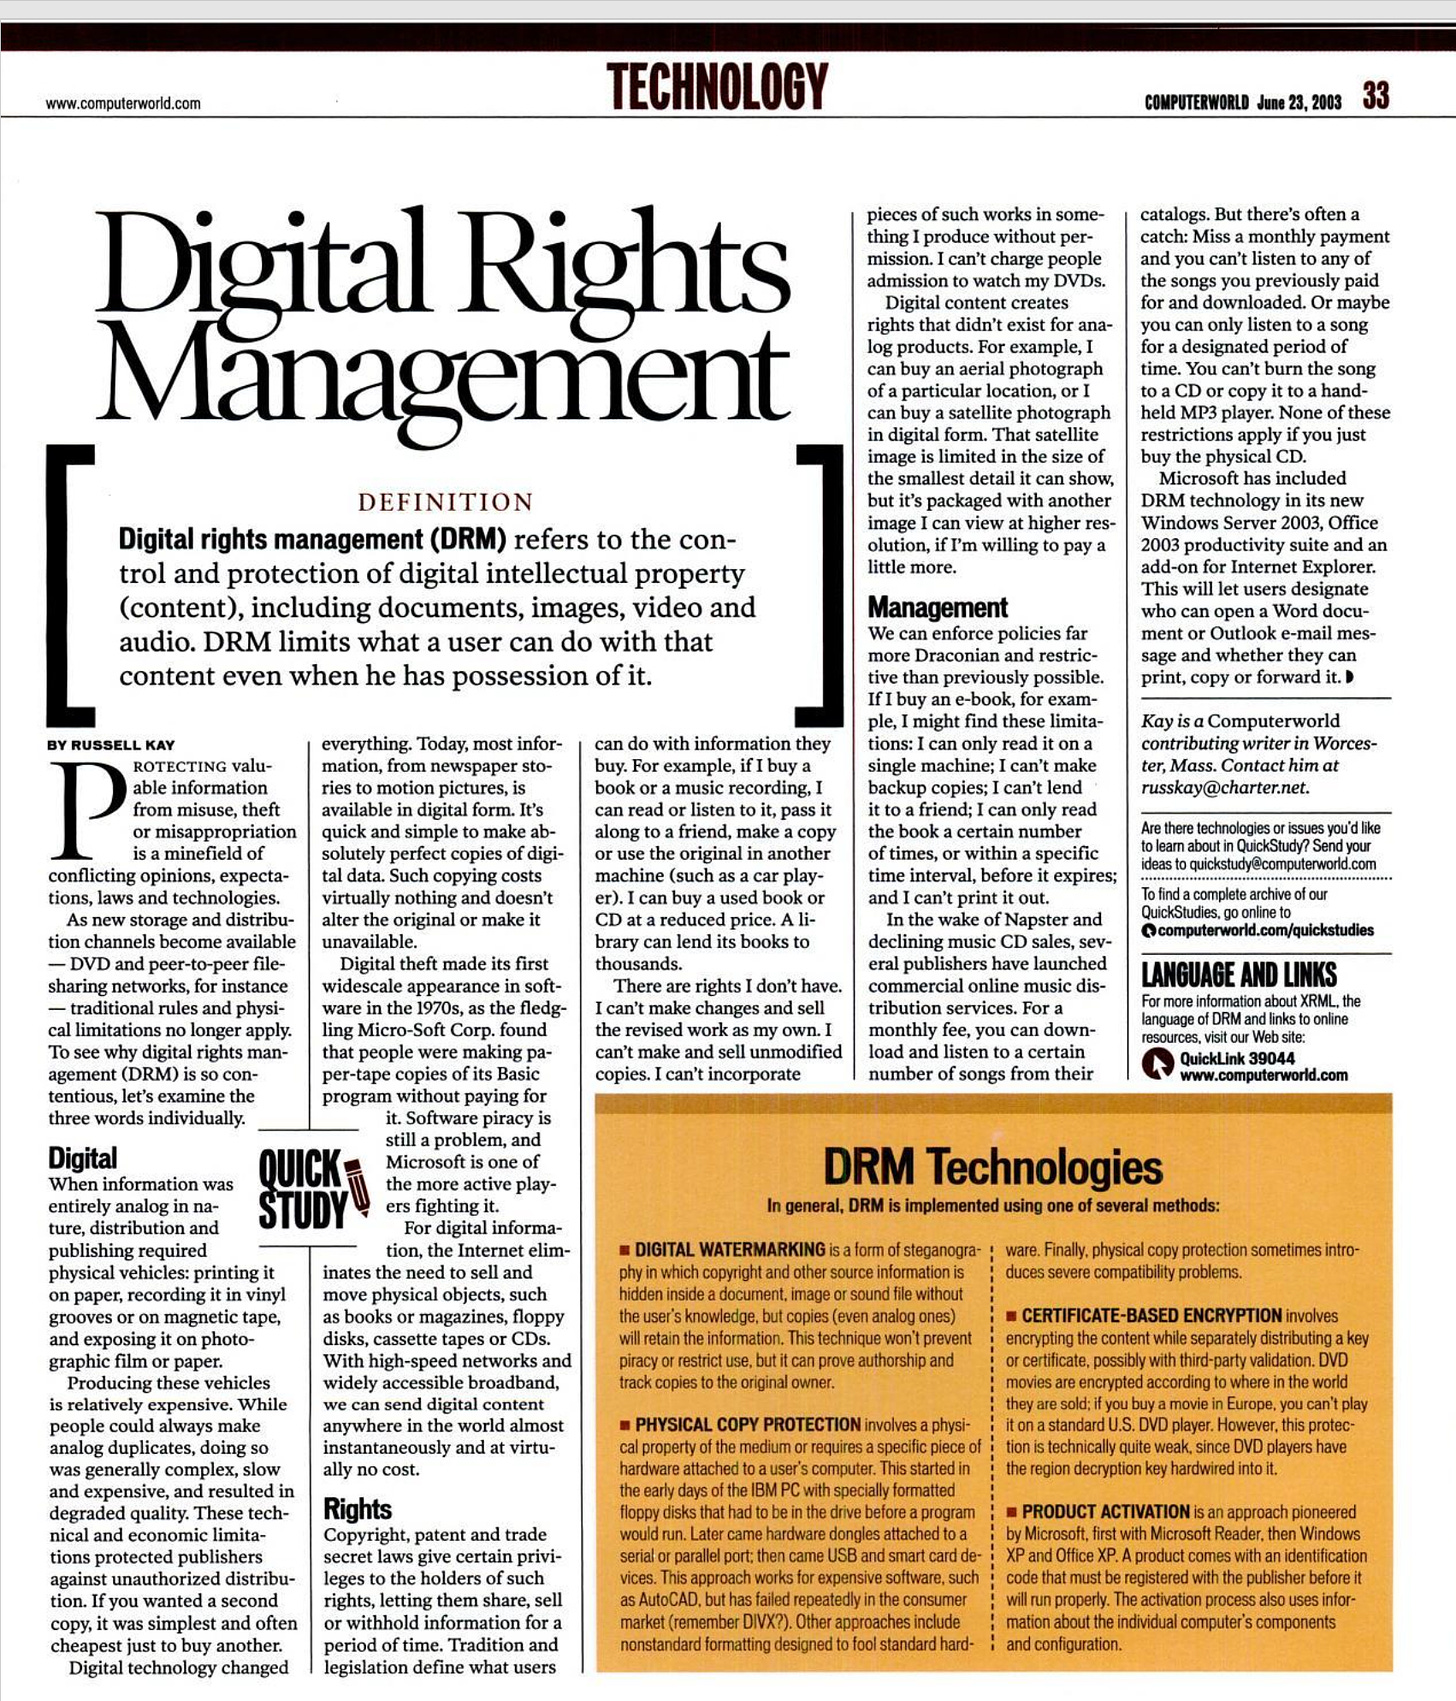 Full scanned page of an article on the broad topic of Digital Rights Management